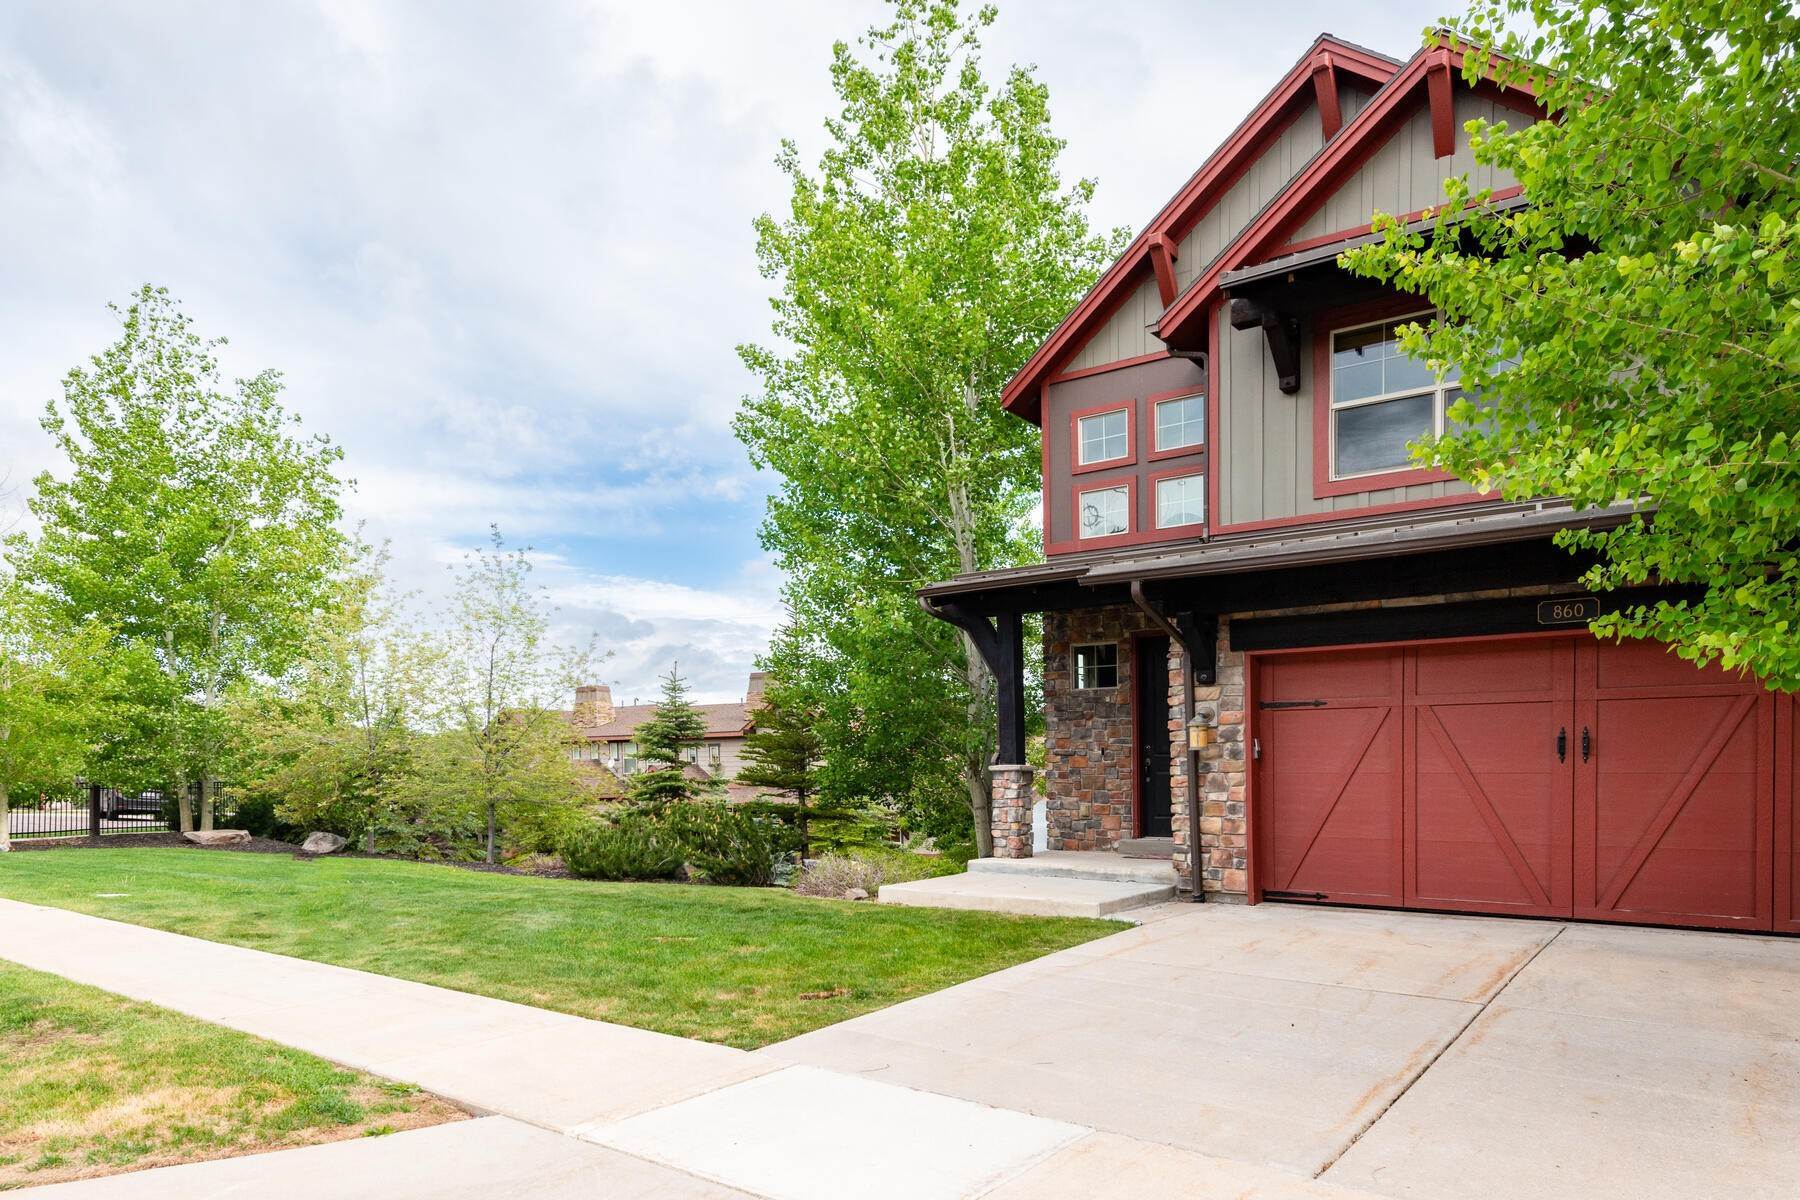 Townhouse for Sale at Nightly Rentals Allowed at this Park City Area Townhome. 860 W Benjamin Pl Kamas, Utah 84036 United States